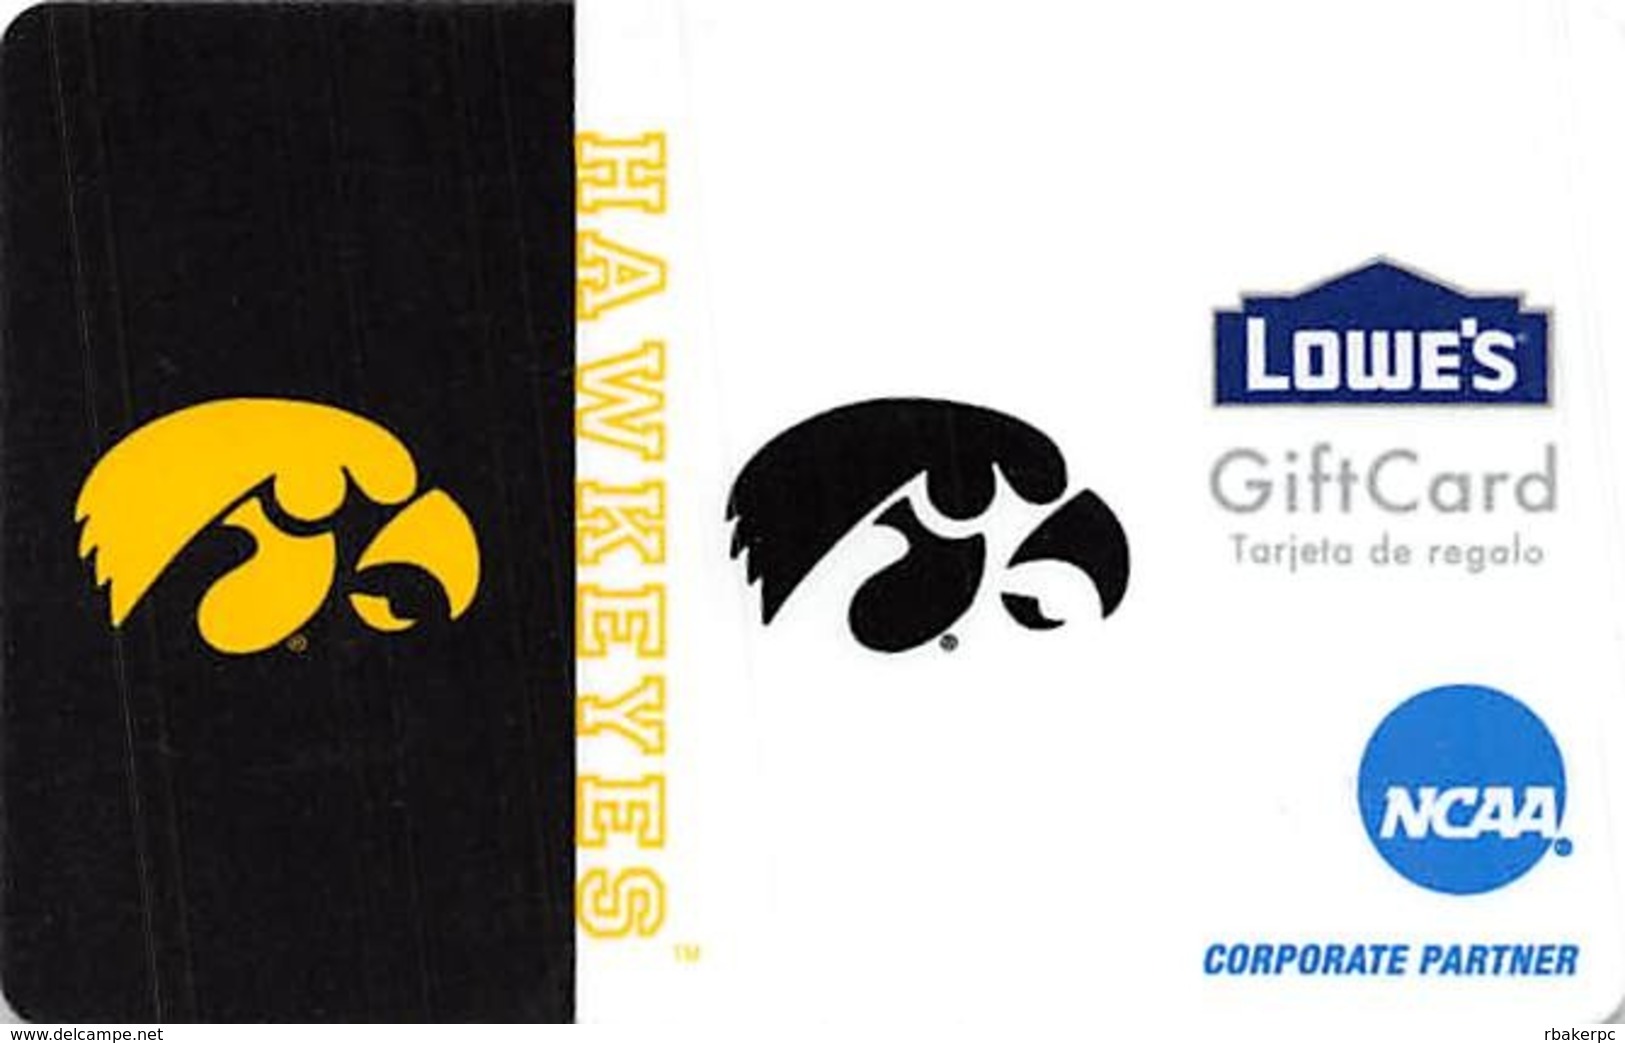 Lowes NCAA Gift Card - Hawkeyes - Cartes Cadeaux